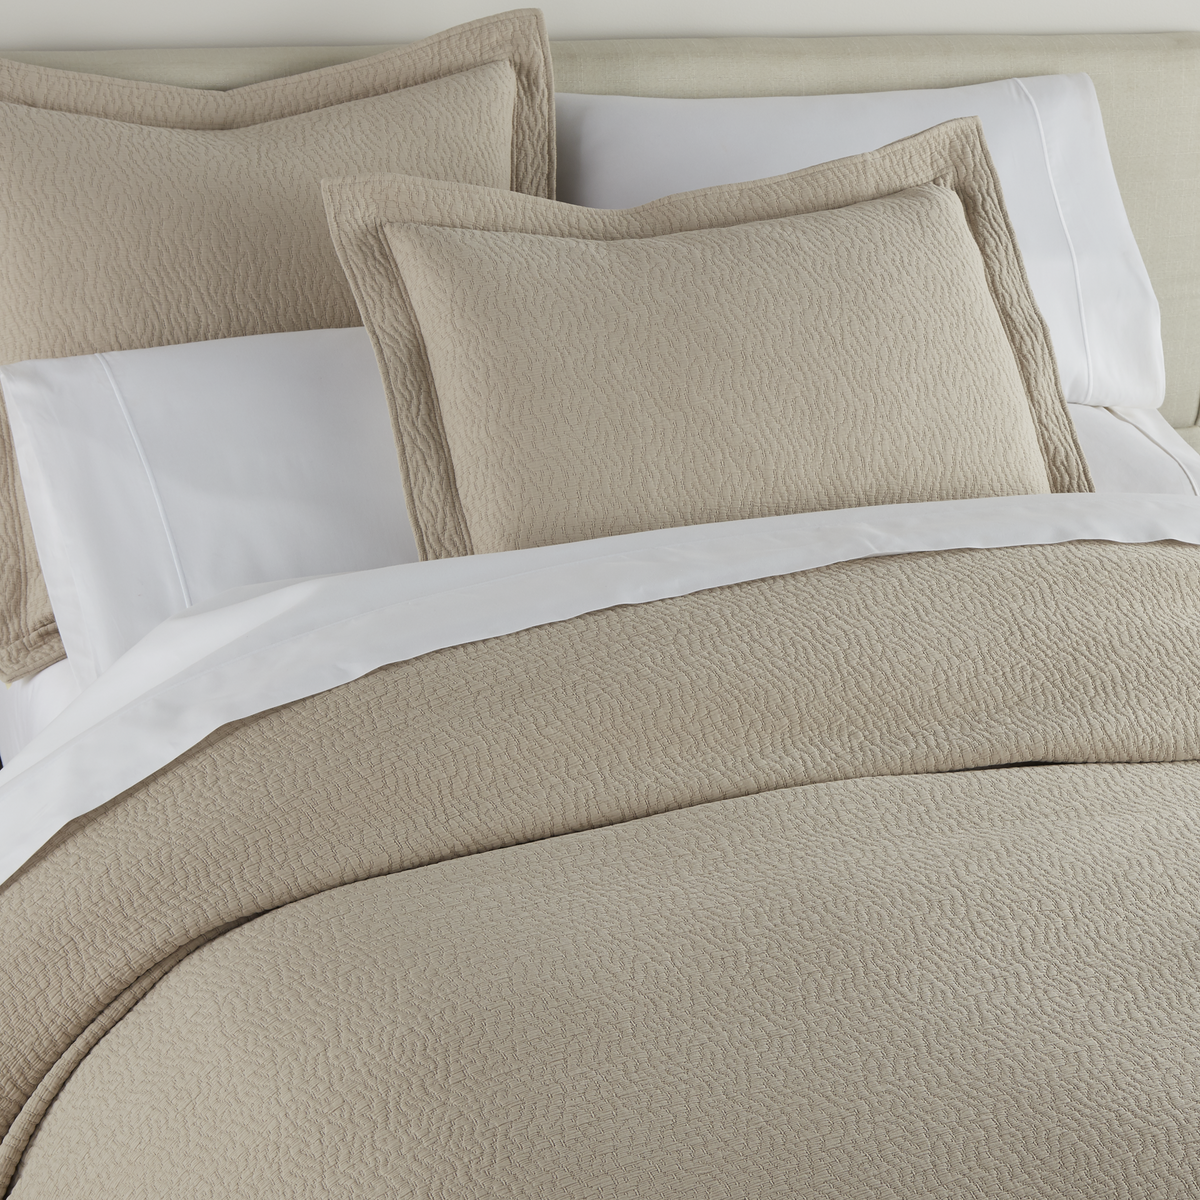 Close Up Image of Peacock Alley Mia Stonewashed Matelassé Bedding in Color Dune